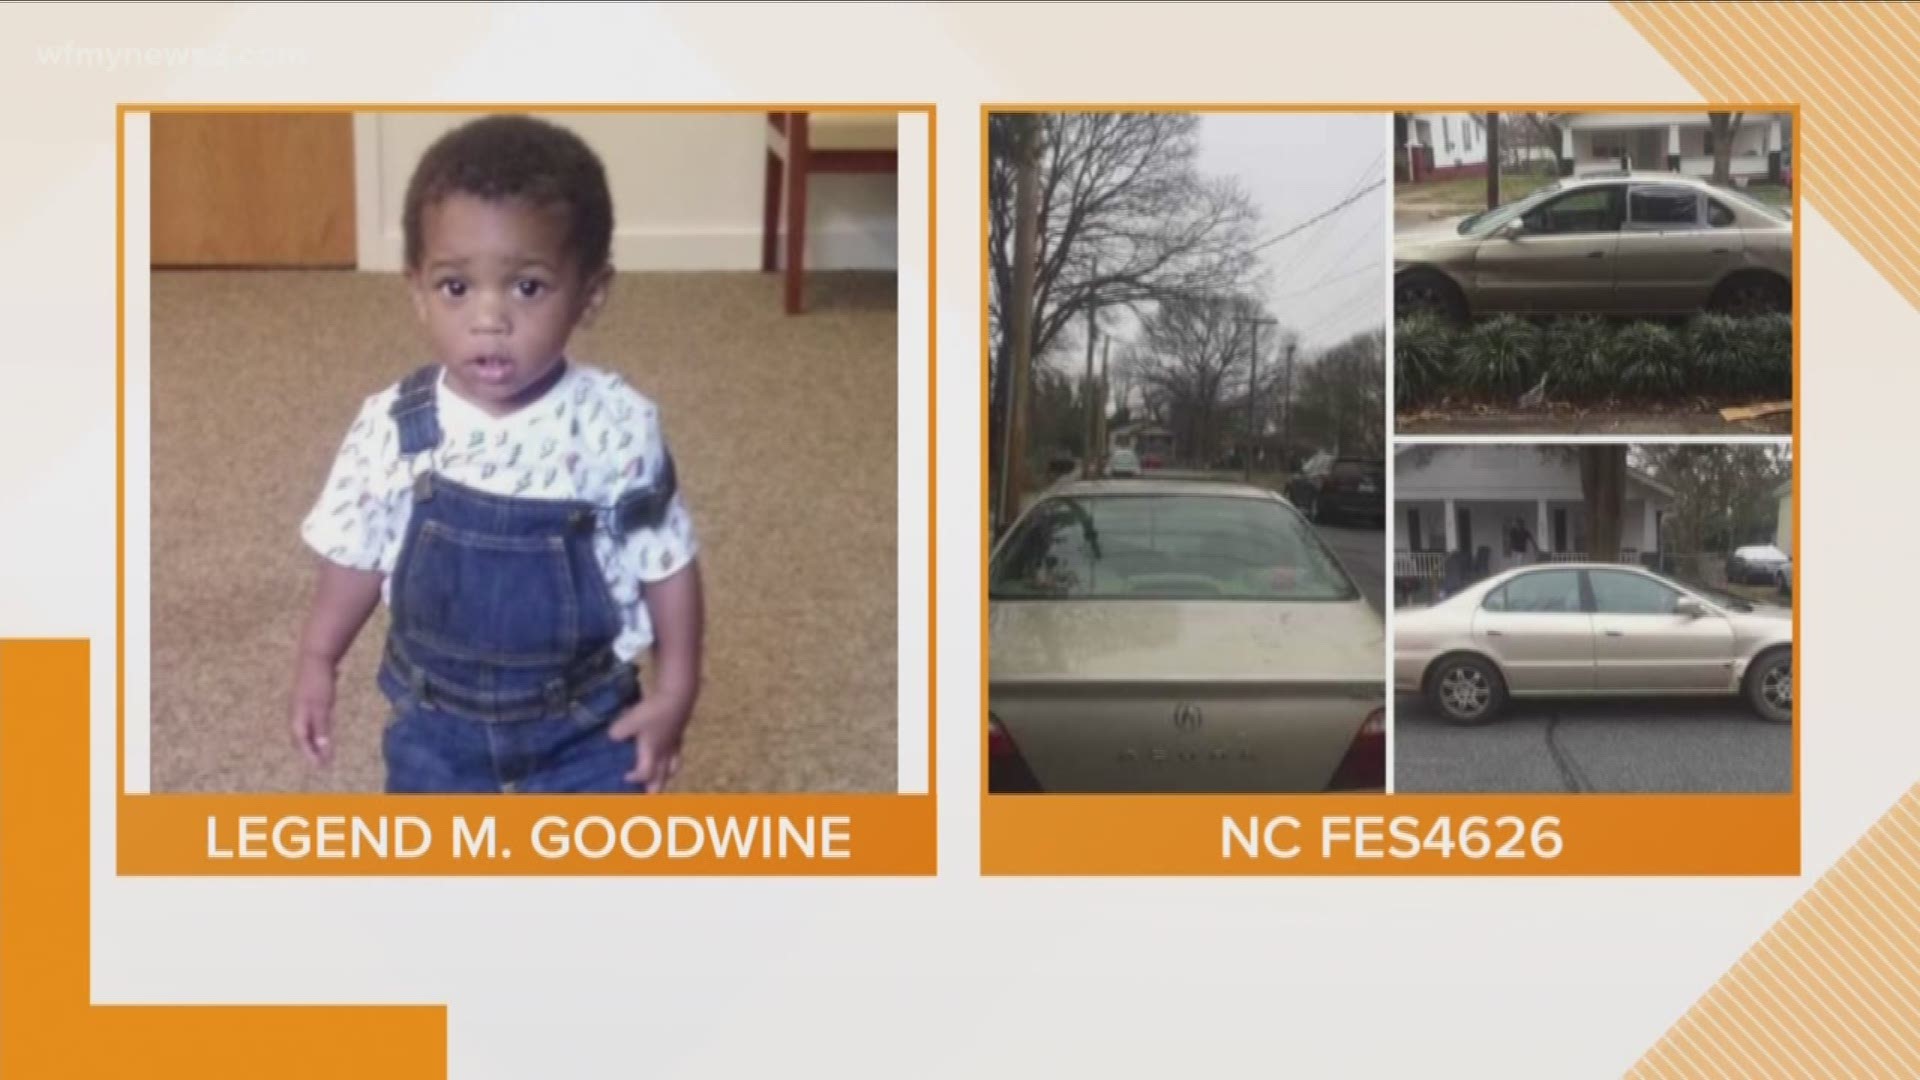 An amber alert is out for a one year old child missing in High Point.